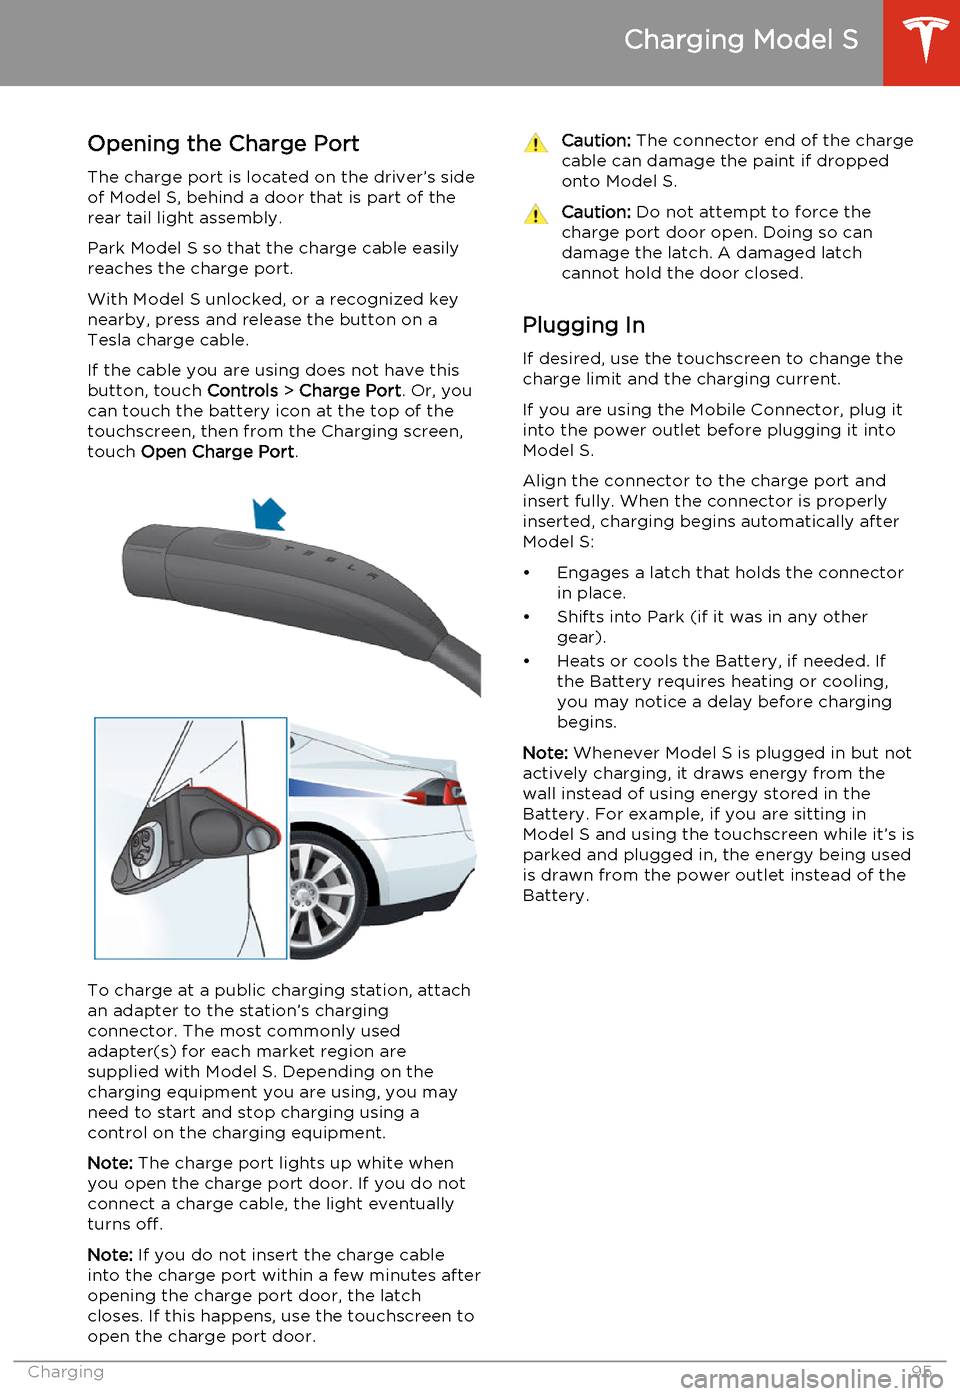 TESLA MODEL S 2014  Owners manual (North America) Opening the Charge Port
The charge port is located on the driver’s side of Model S, behind a door that is part of therear tail light assembly.
Park Model S so that the charge cable easily
reaches th